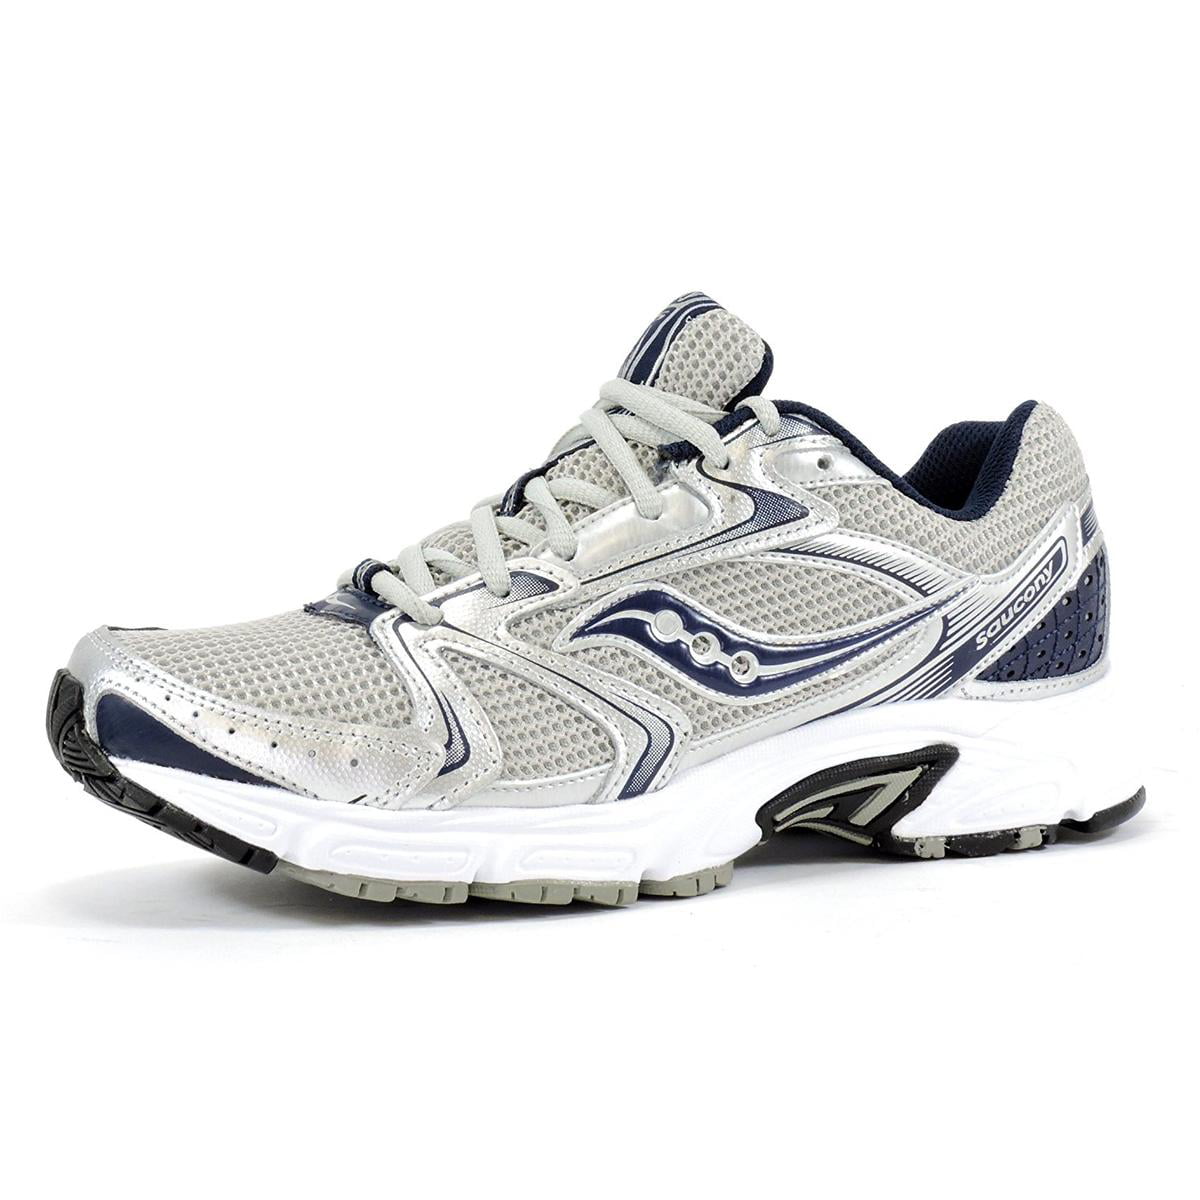 saucony oasis 2 shoes